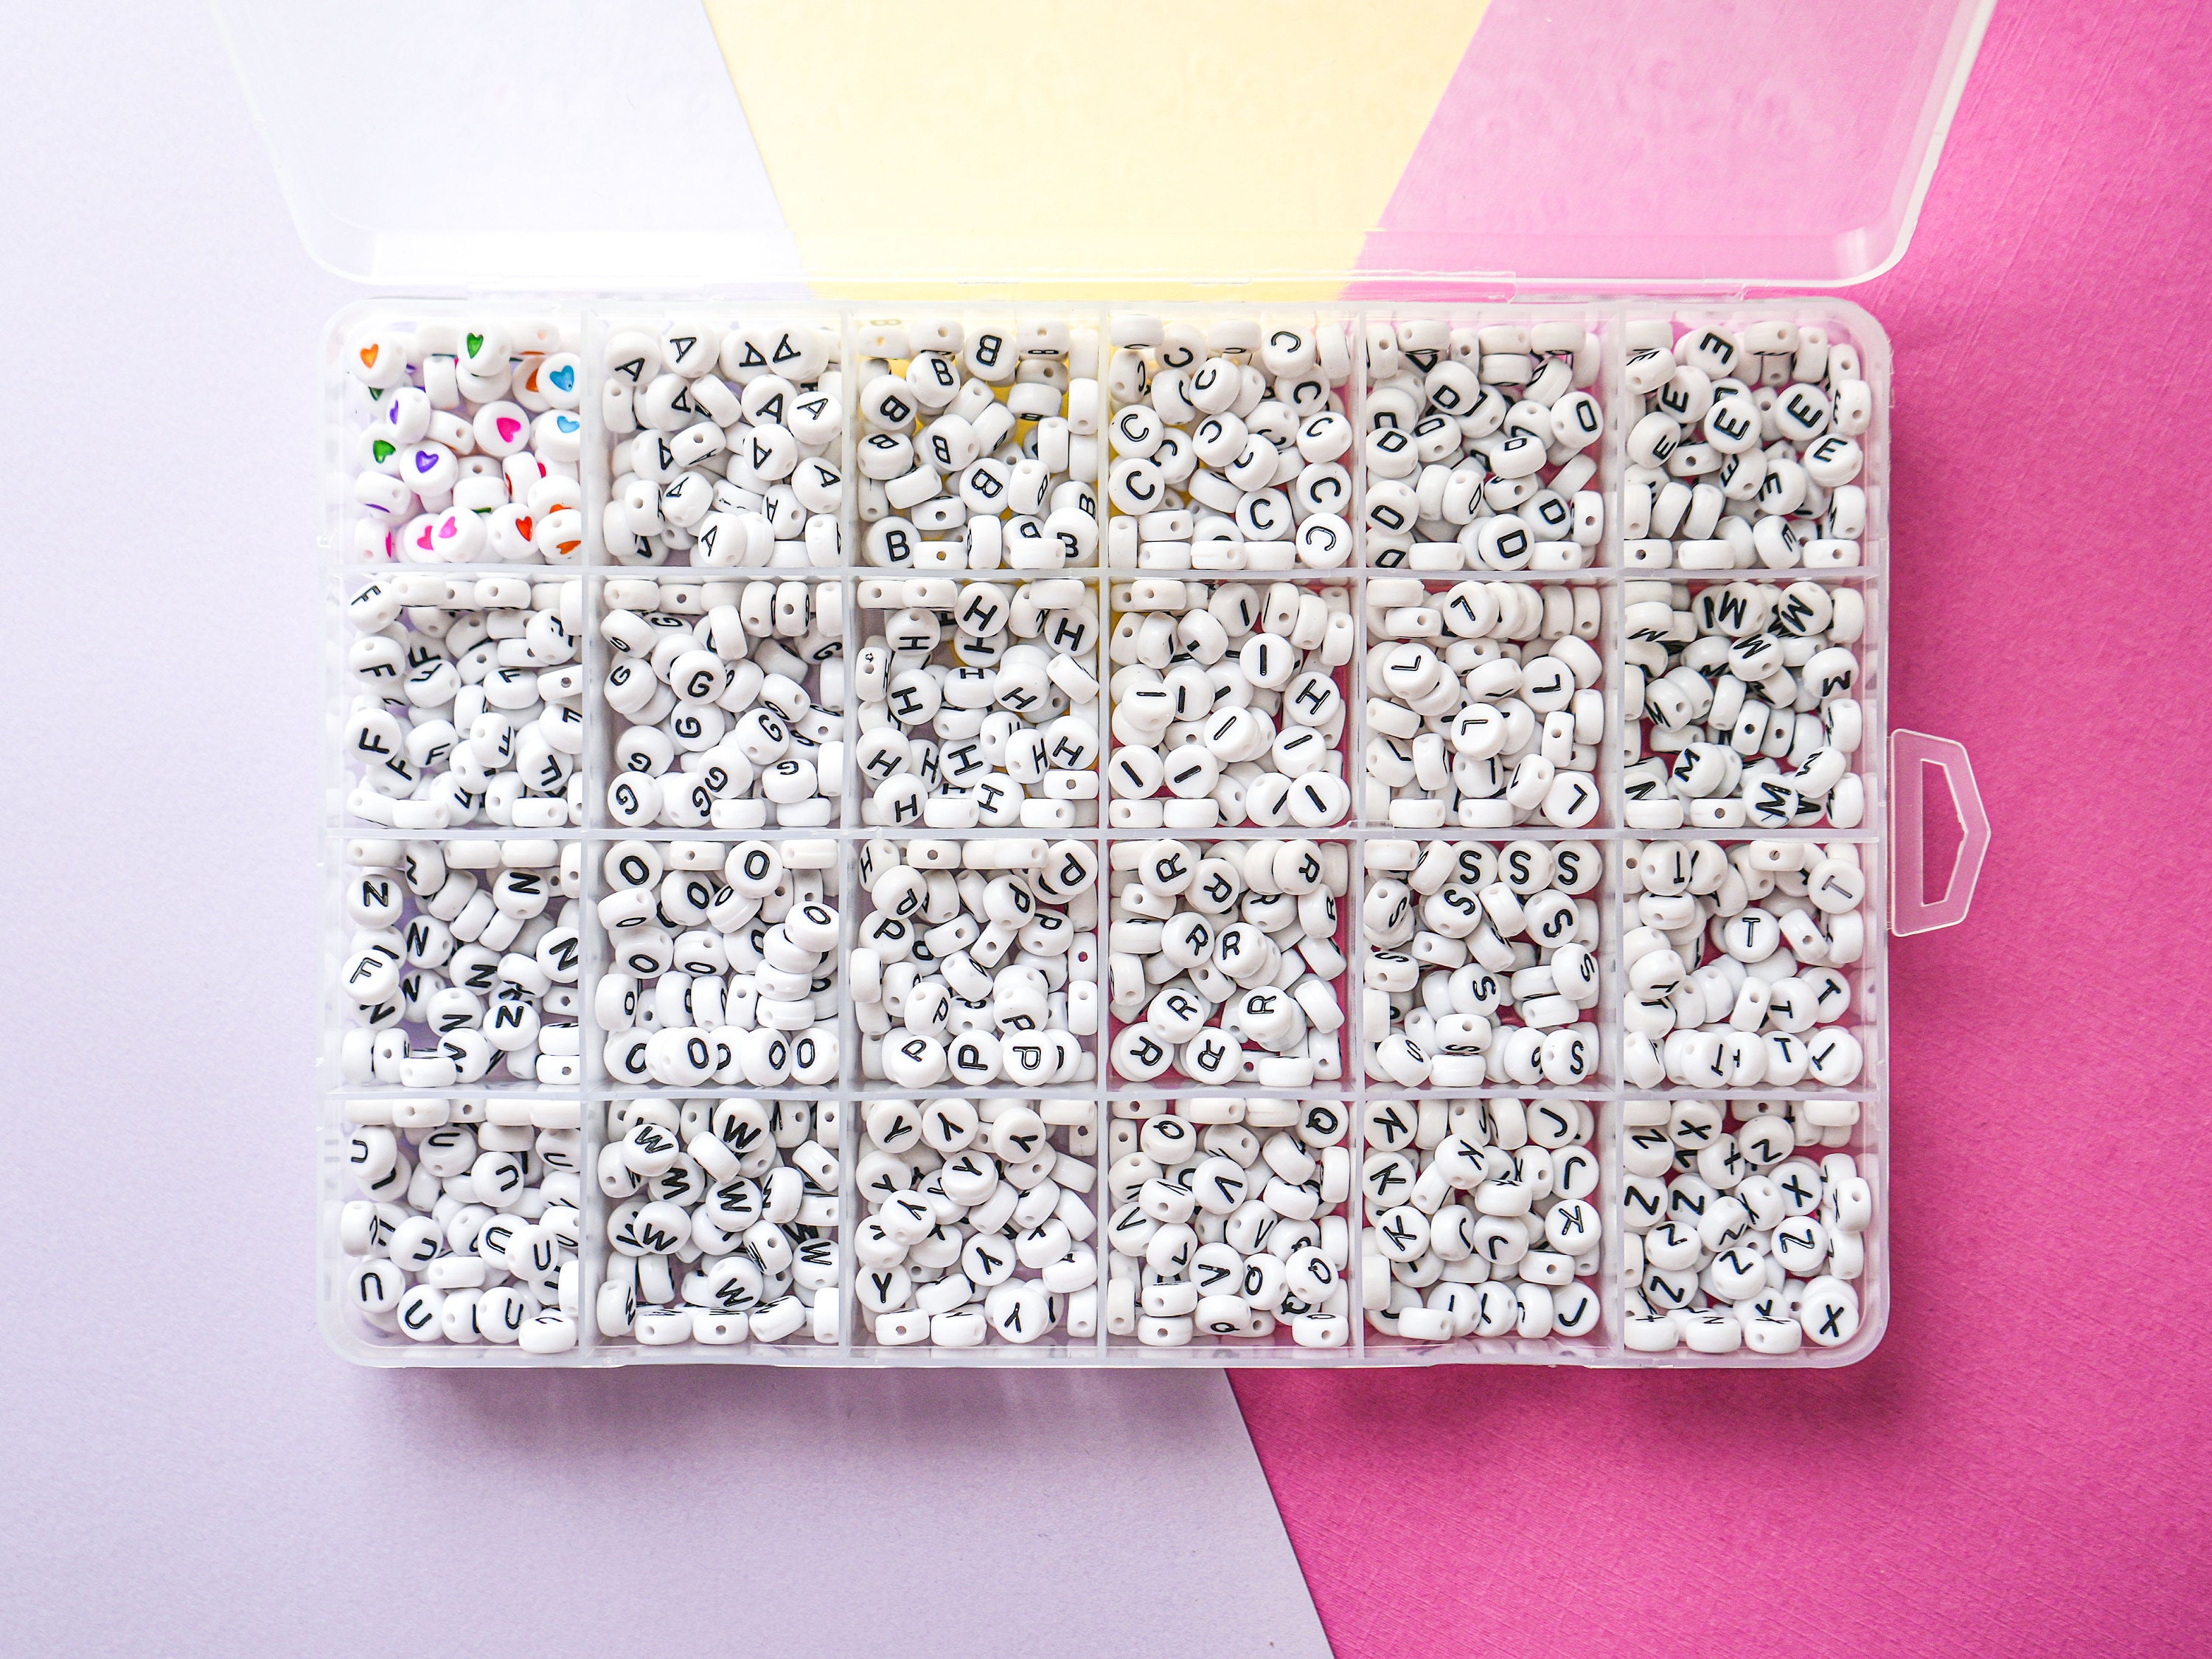  Acrylic Letter Beads Alphabet White Letters Pink Cube Bead,  6×6mm 1200pcs, for Friendship Bracelets and Gifts Souvenir Jewelry Making :  Arts, Crafts & Sewing